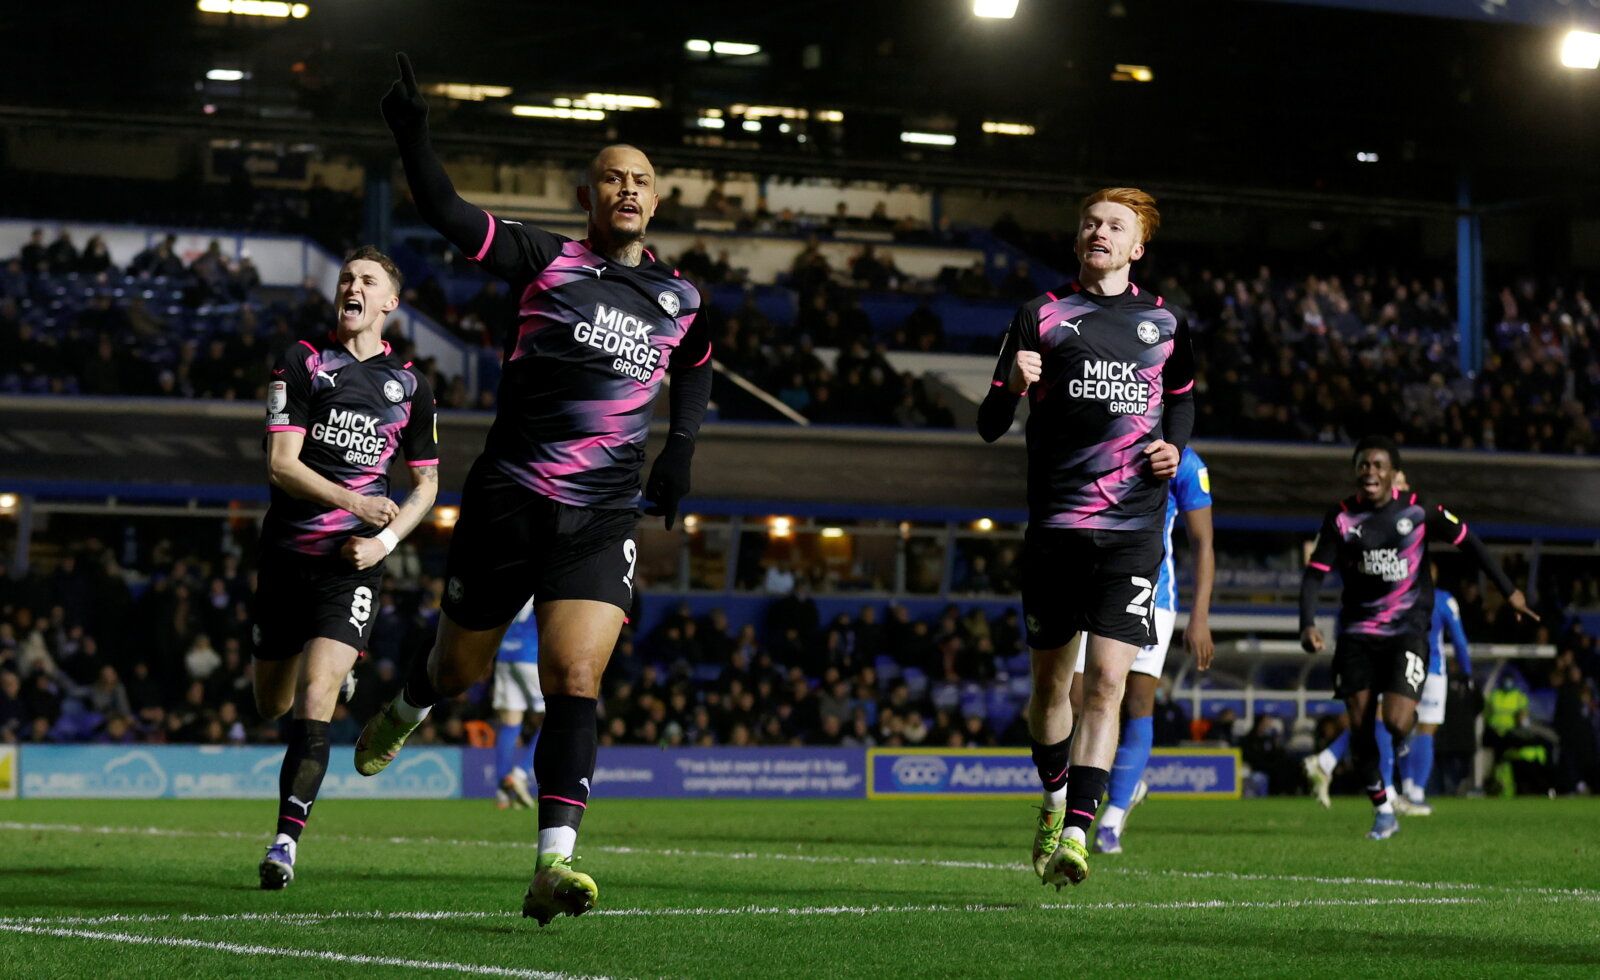 Soccer Football - Championship - Birmingham City v Peterborough United - St Andrew's, Birmingham, Britain - January 25, 2022 Peterborough United's Jonson Clarke-Harris celebrates scoring their second goal Action Images/Jason Cairnduff EDITORIAL USE ONLY. No use with unauthorized audio, video, data, fixture lists, club/league logos or 